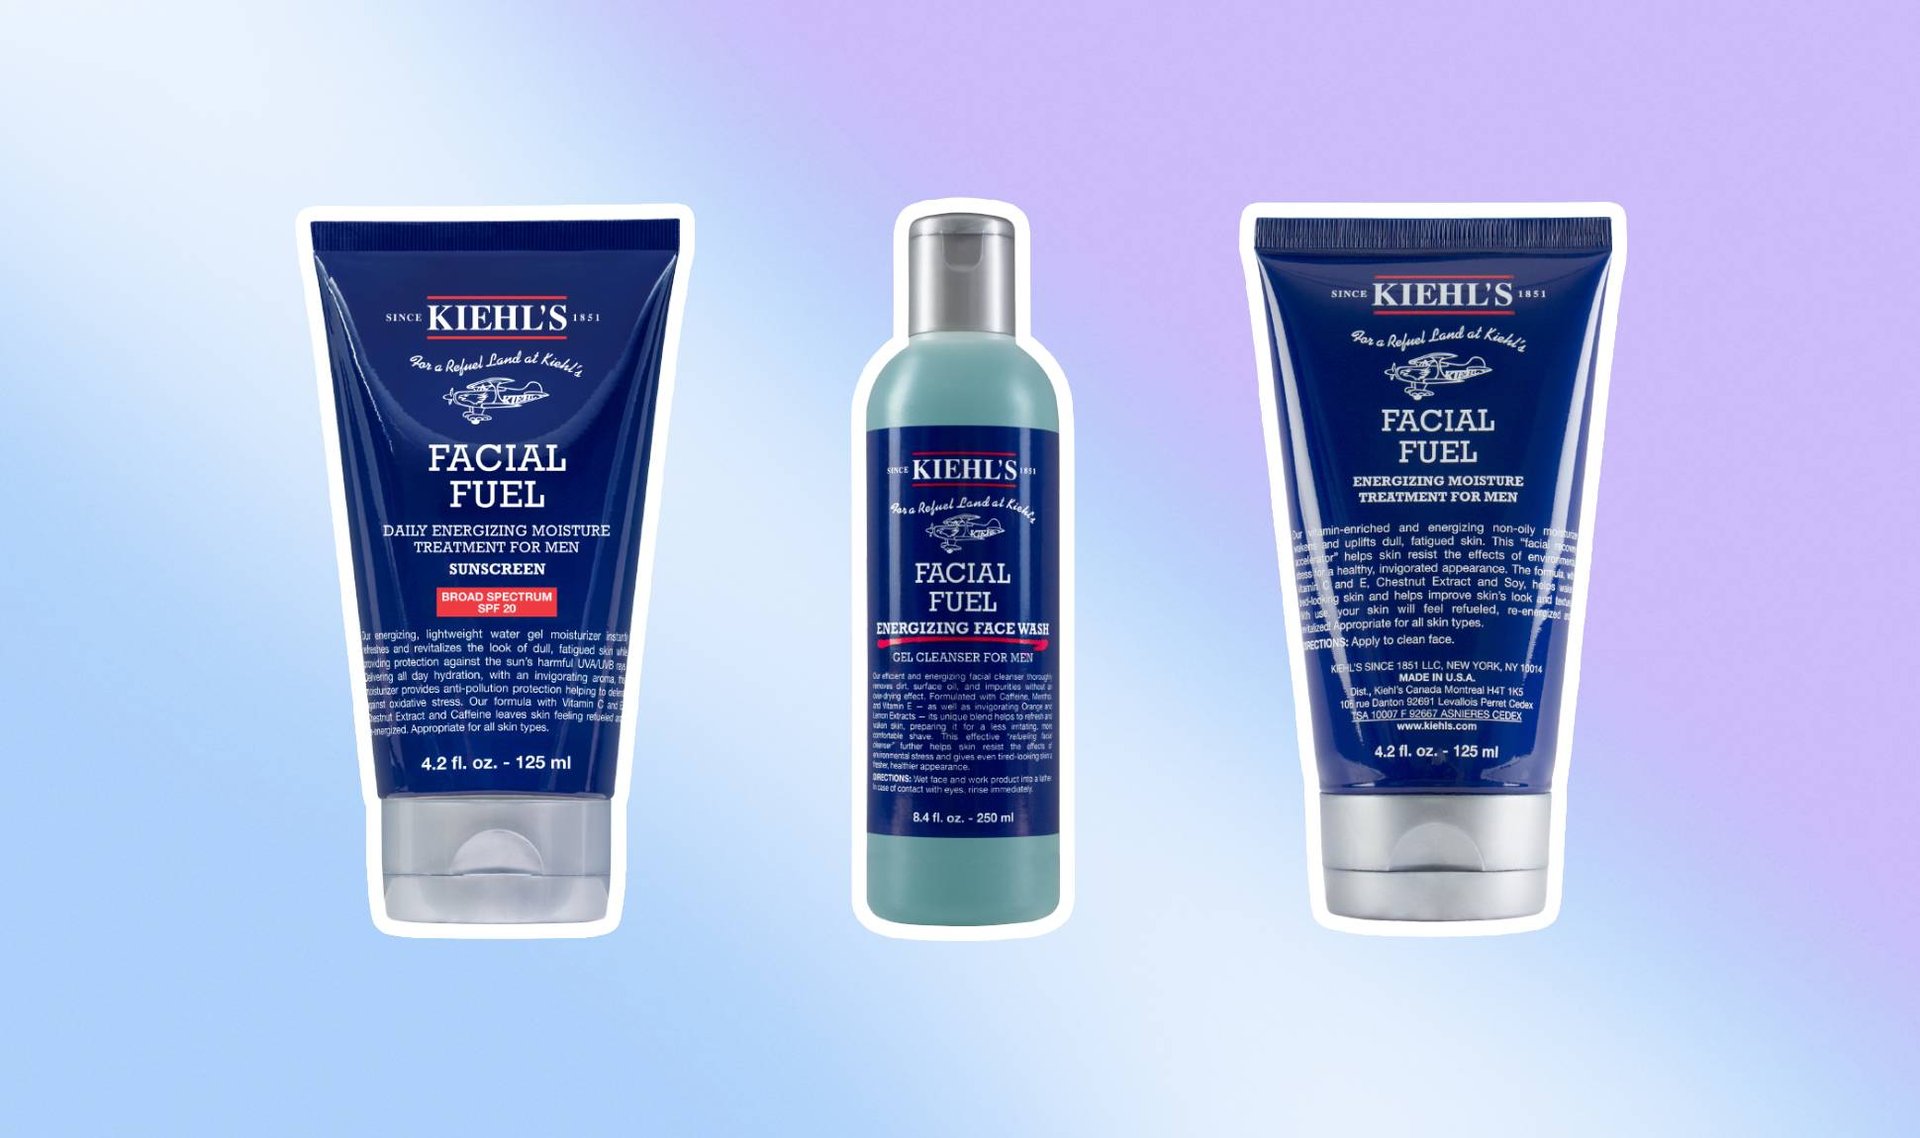 A Definitive Guide to the Kiehl’s Facial Fuel Line 